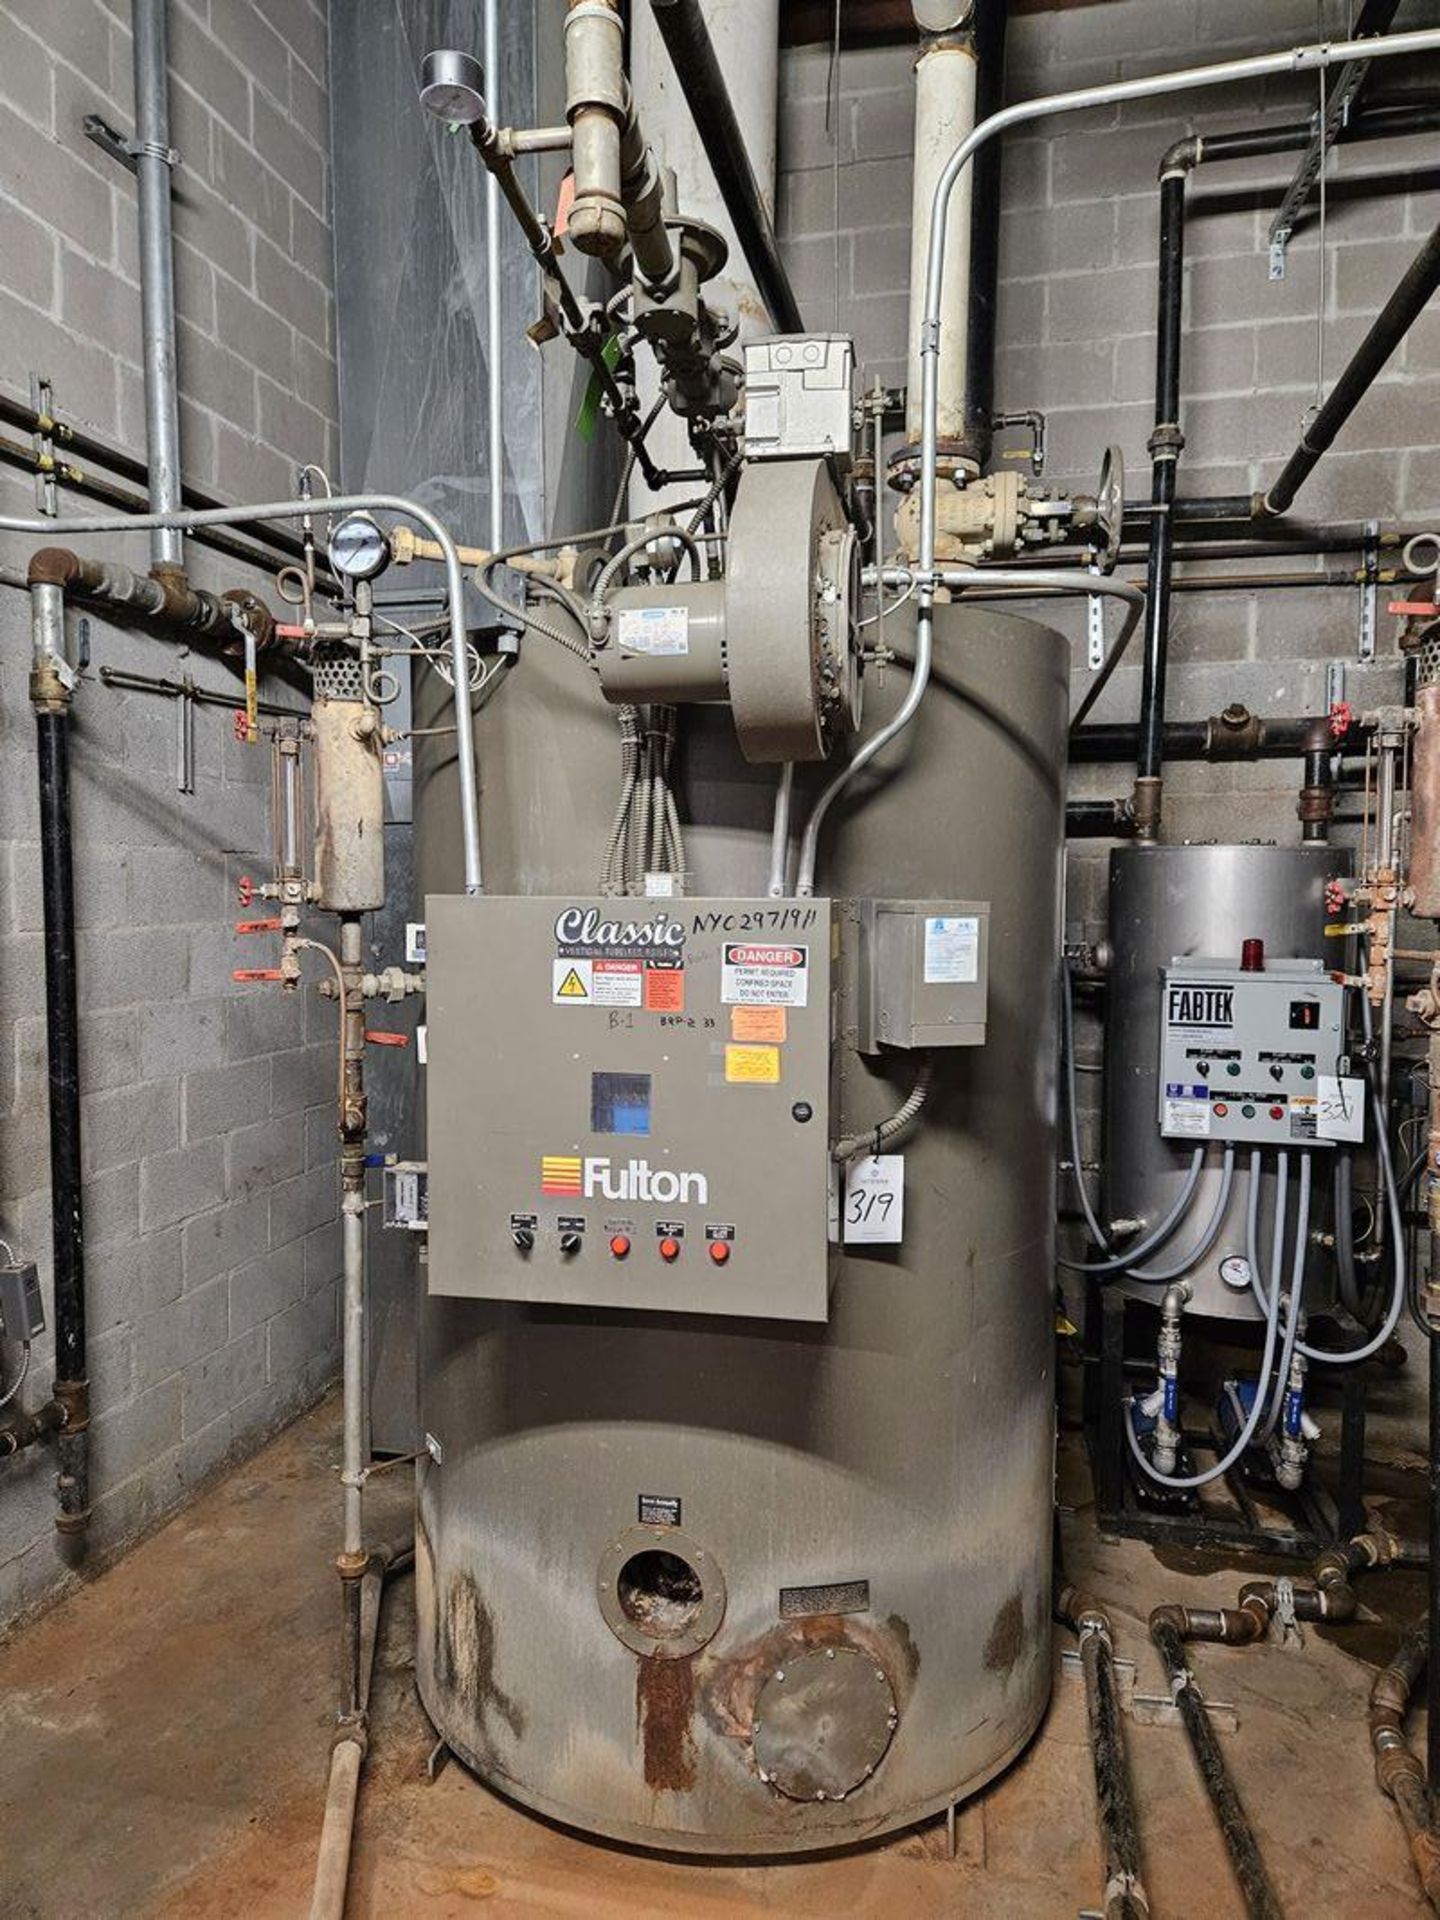 Fulton FB-050-A Gas Fired Vertical Tubeless Boiler - Image 2 of 4